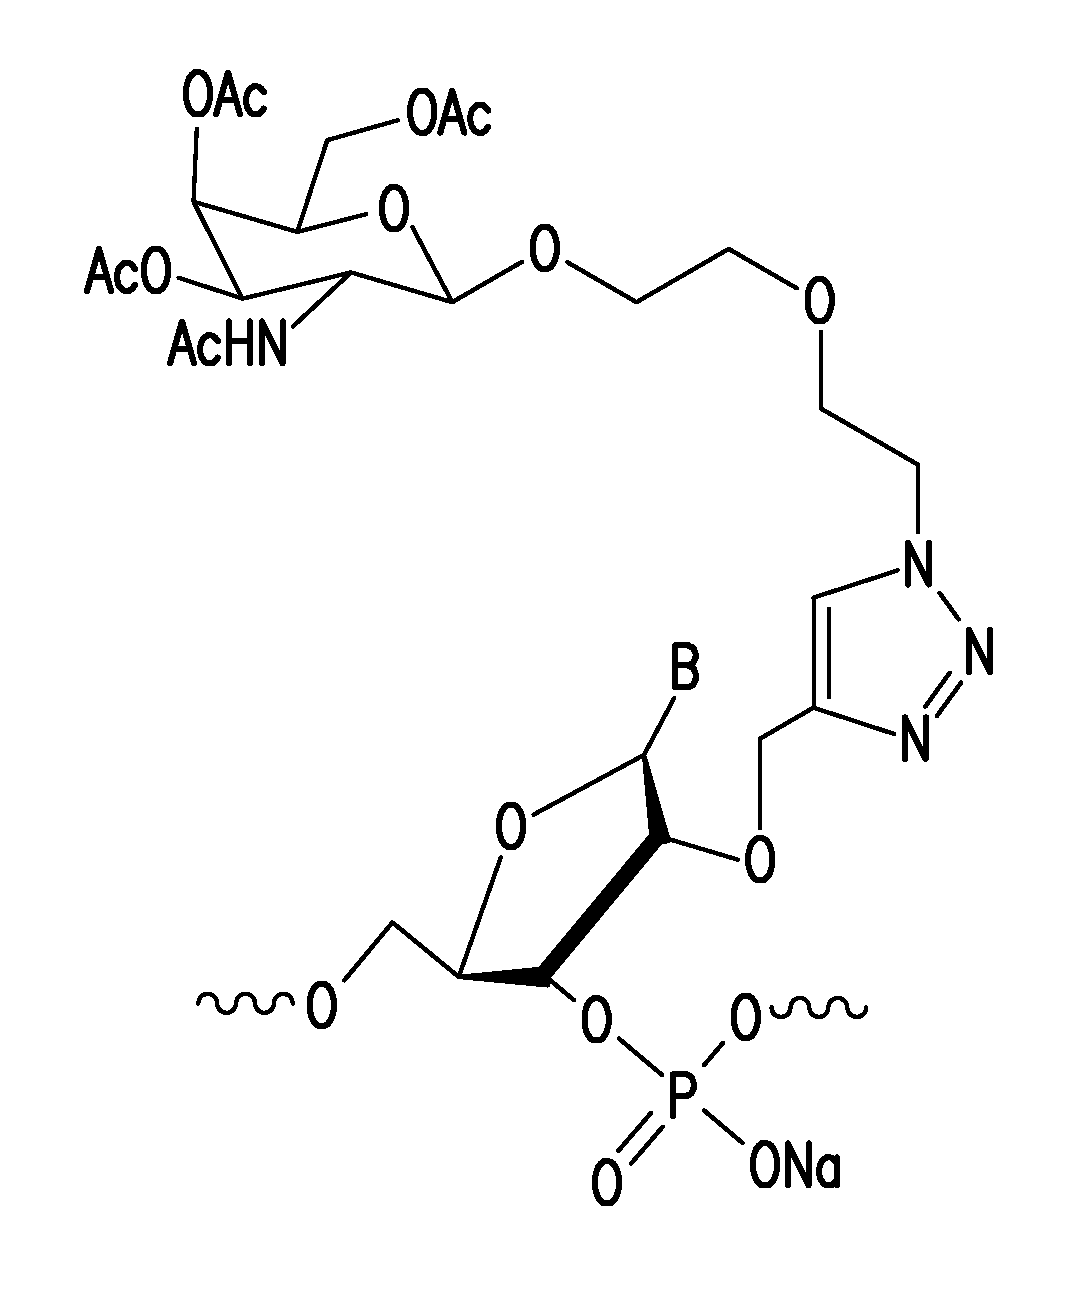 Post-synthetic chemical modification of RNA at the 2'-position of the ribose ring via "click" chemistry